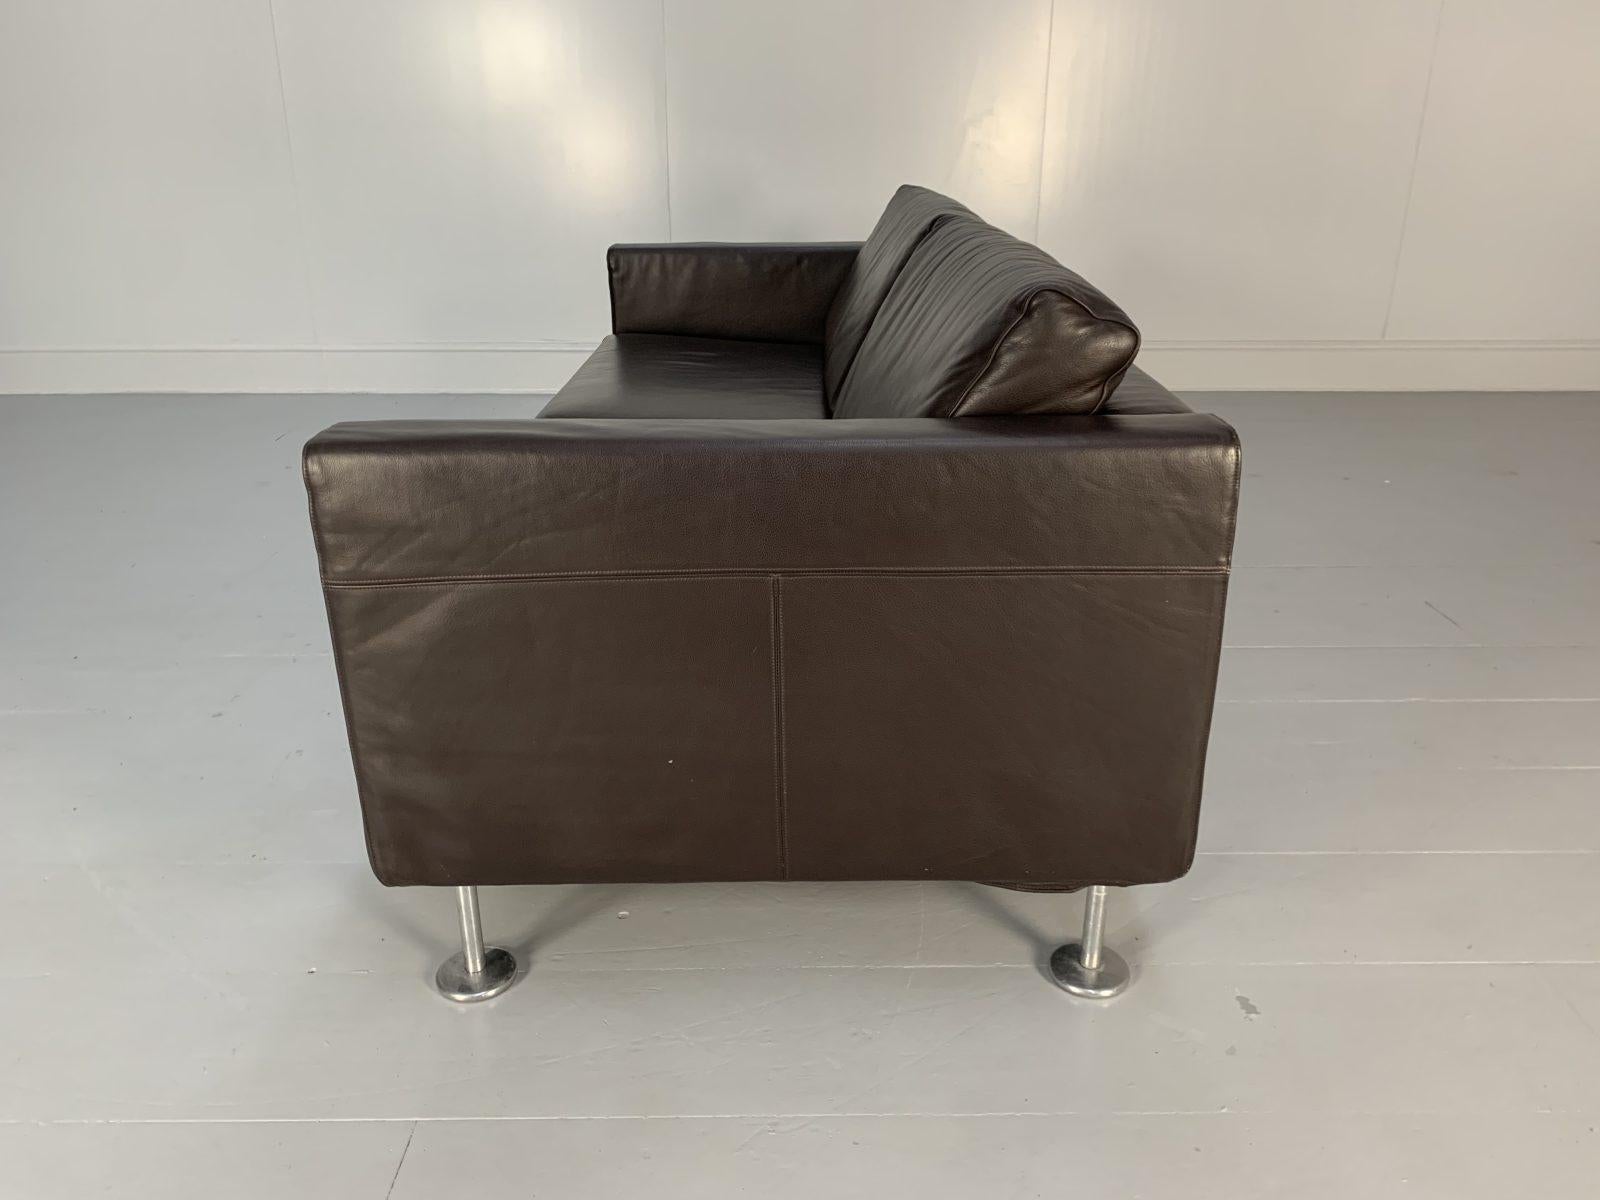 Vitra “Park” 2-Seat Sofa, in Dark Brown Leather For Sale 1